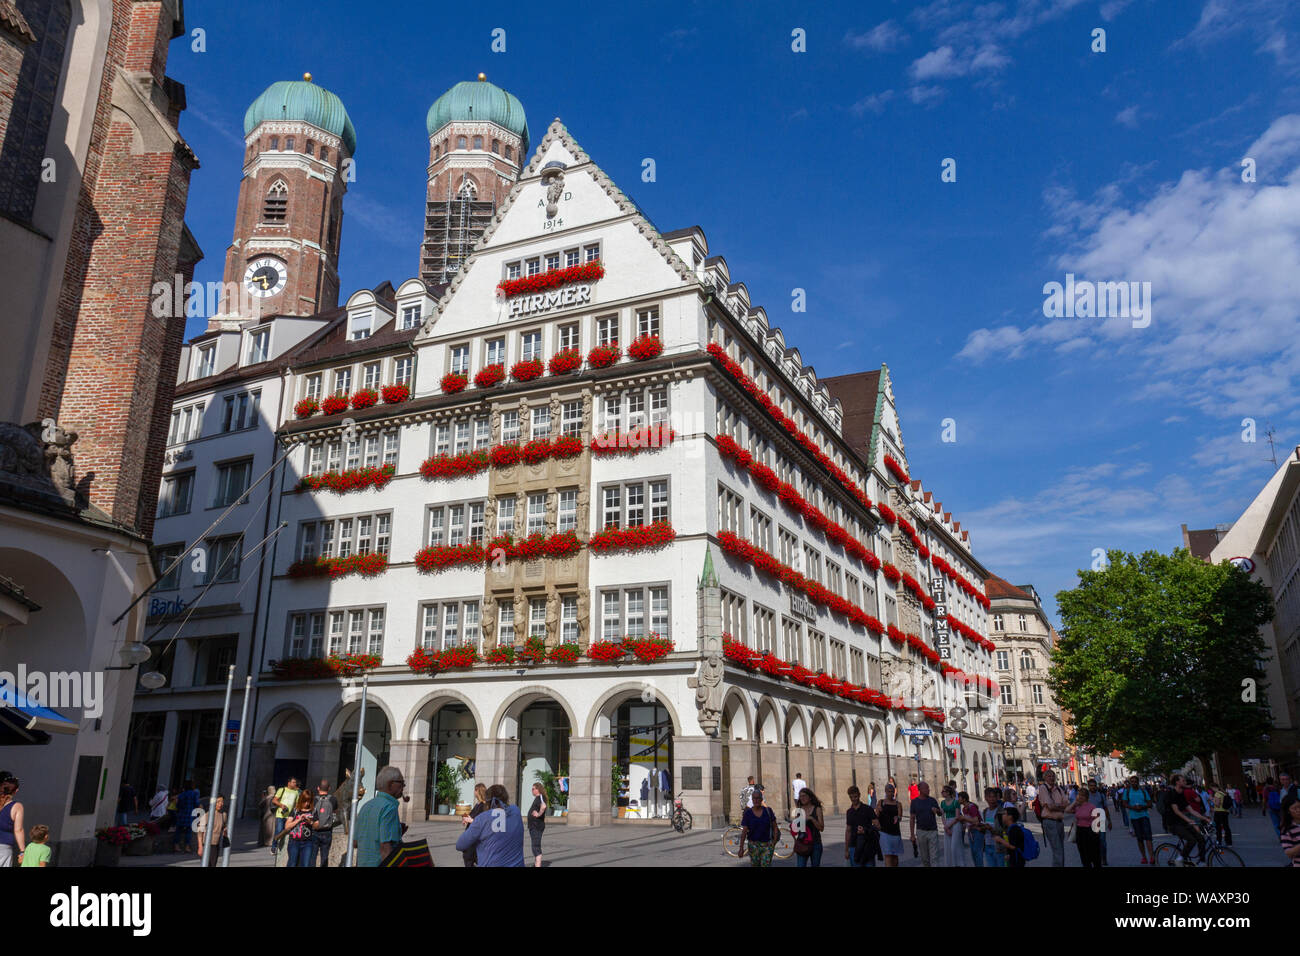 The Hirmer menswear clothing store in Munich, Bavaria, Germany. Stock Photo